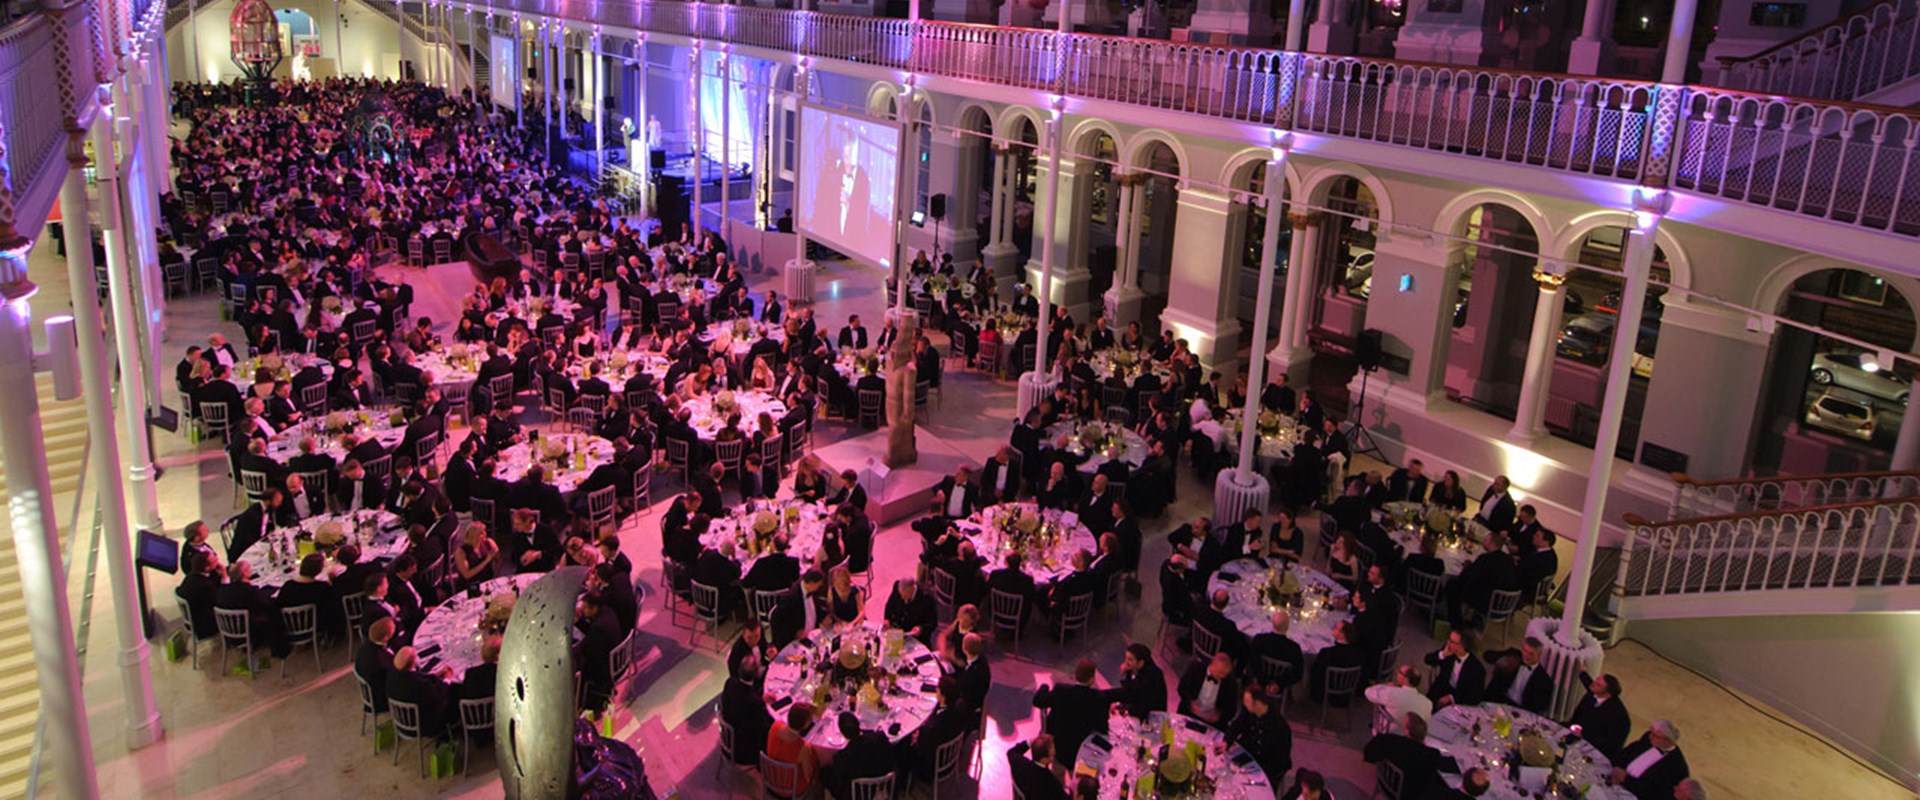 Green Energy Awards in the Grand Gallery at the National Museum of Scotland